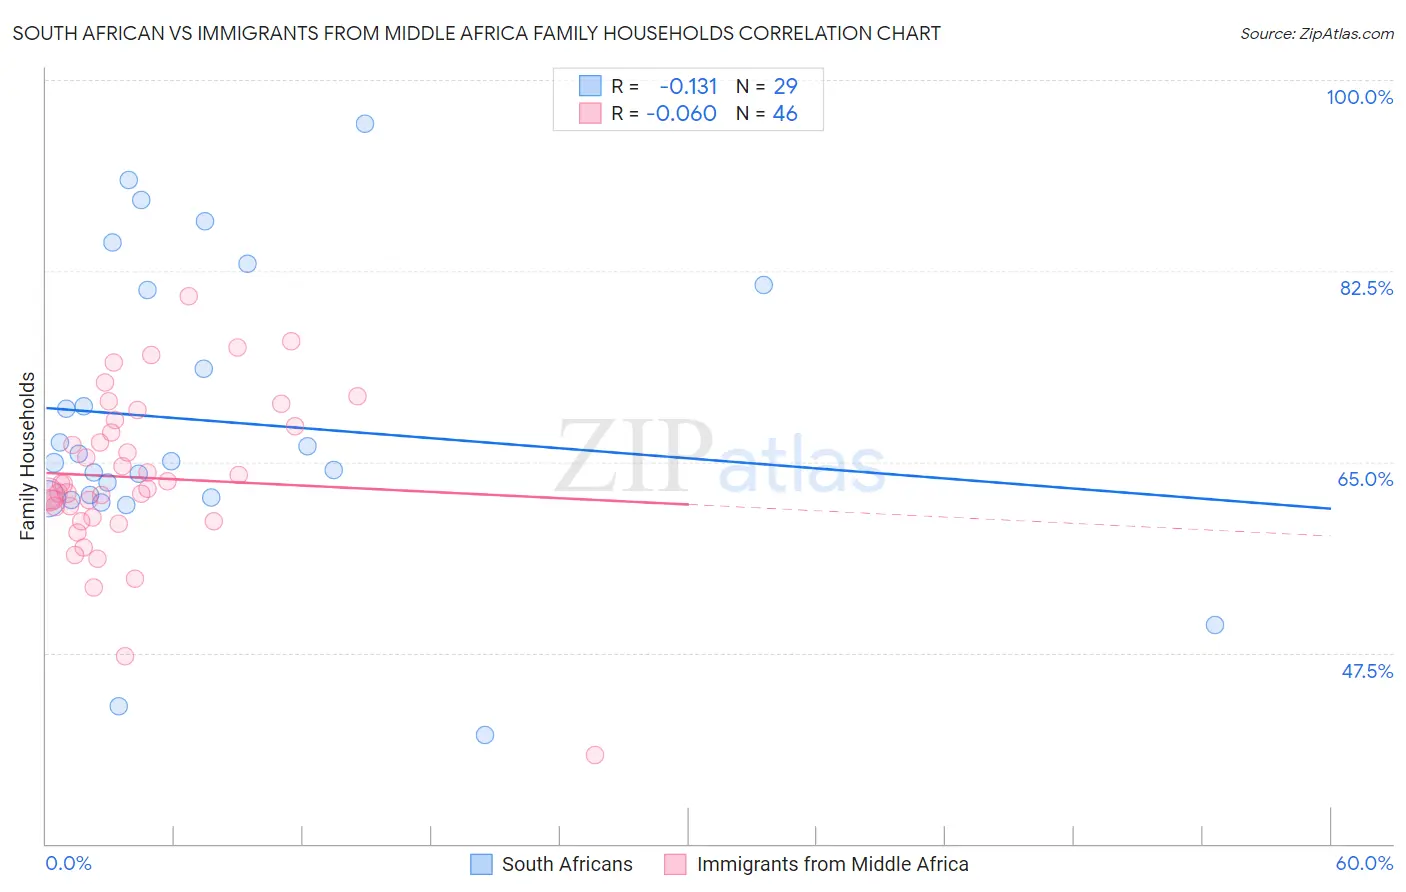 South African vs Immigrants from Middle Africa Family Households